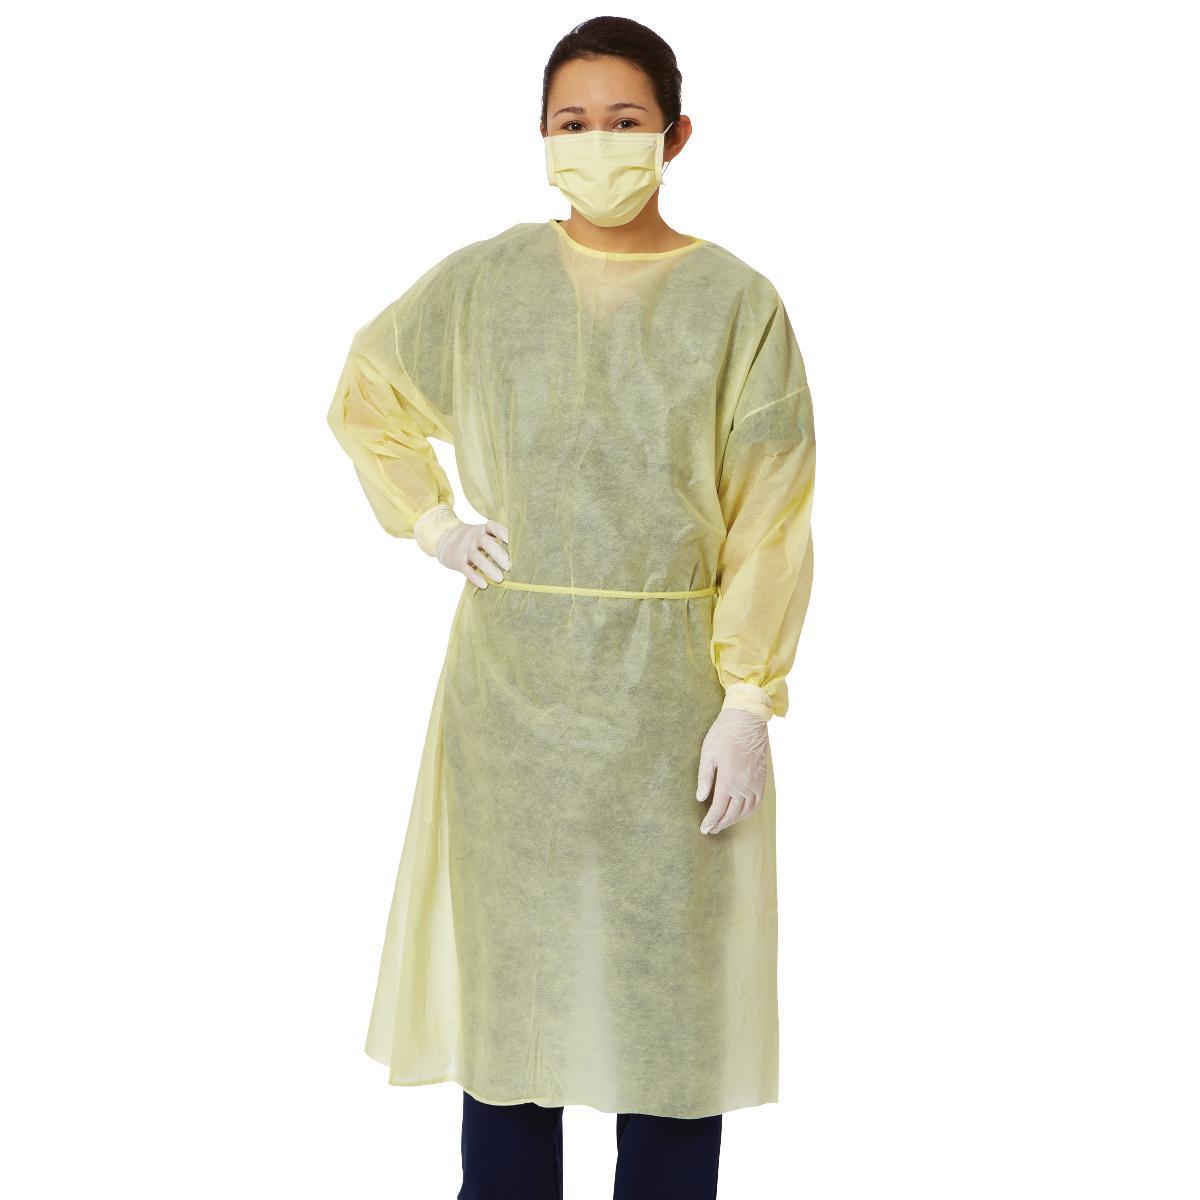 Level 1 Disposable Isolation Gown Assorted Colors (Blue, Yellow, Green, White) 100/Case